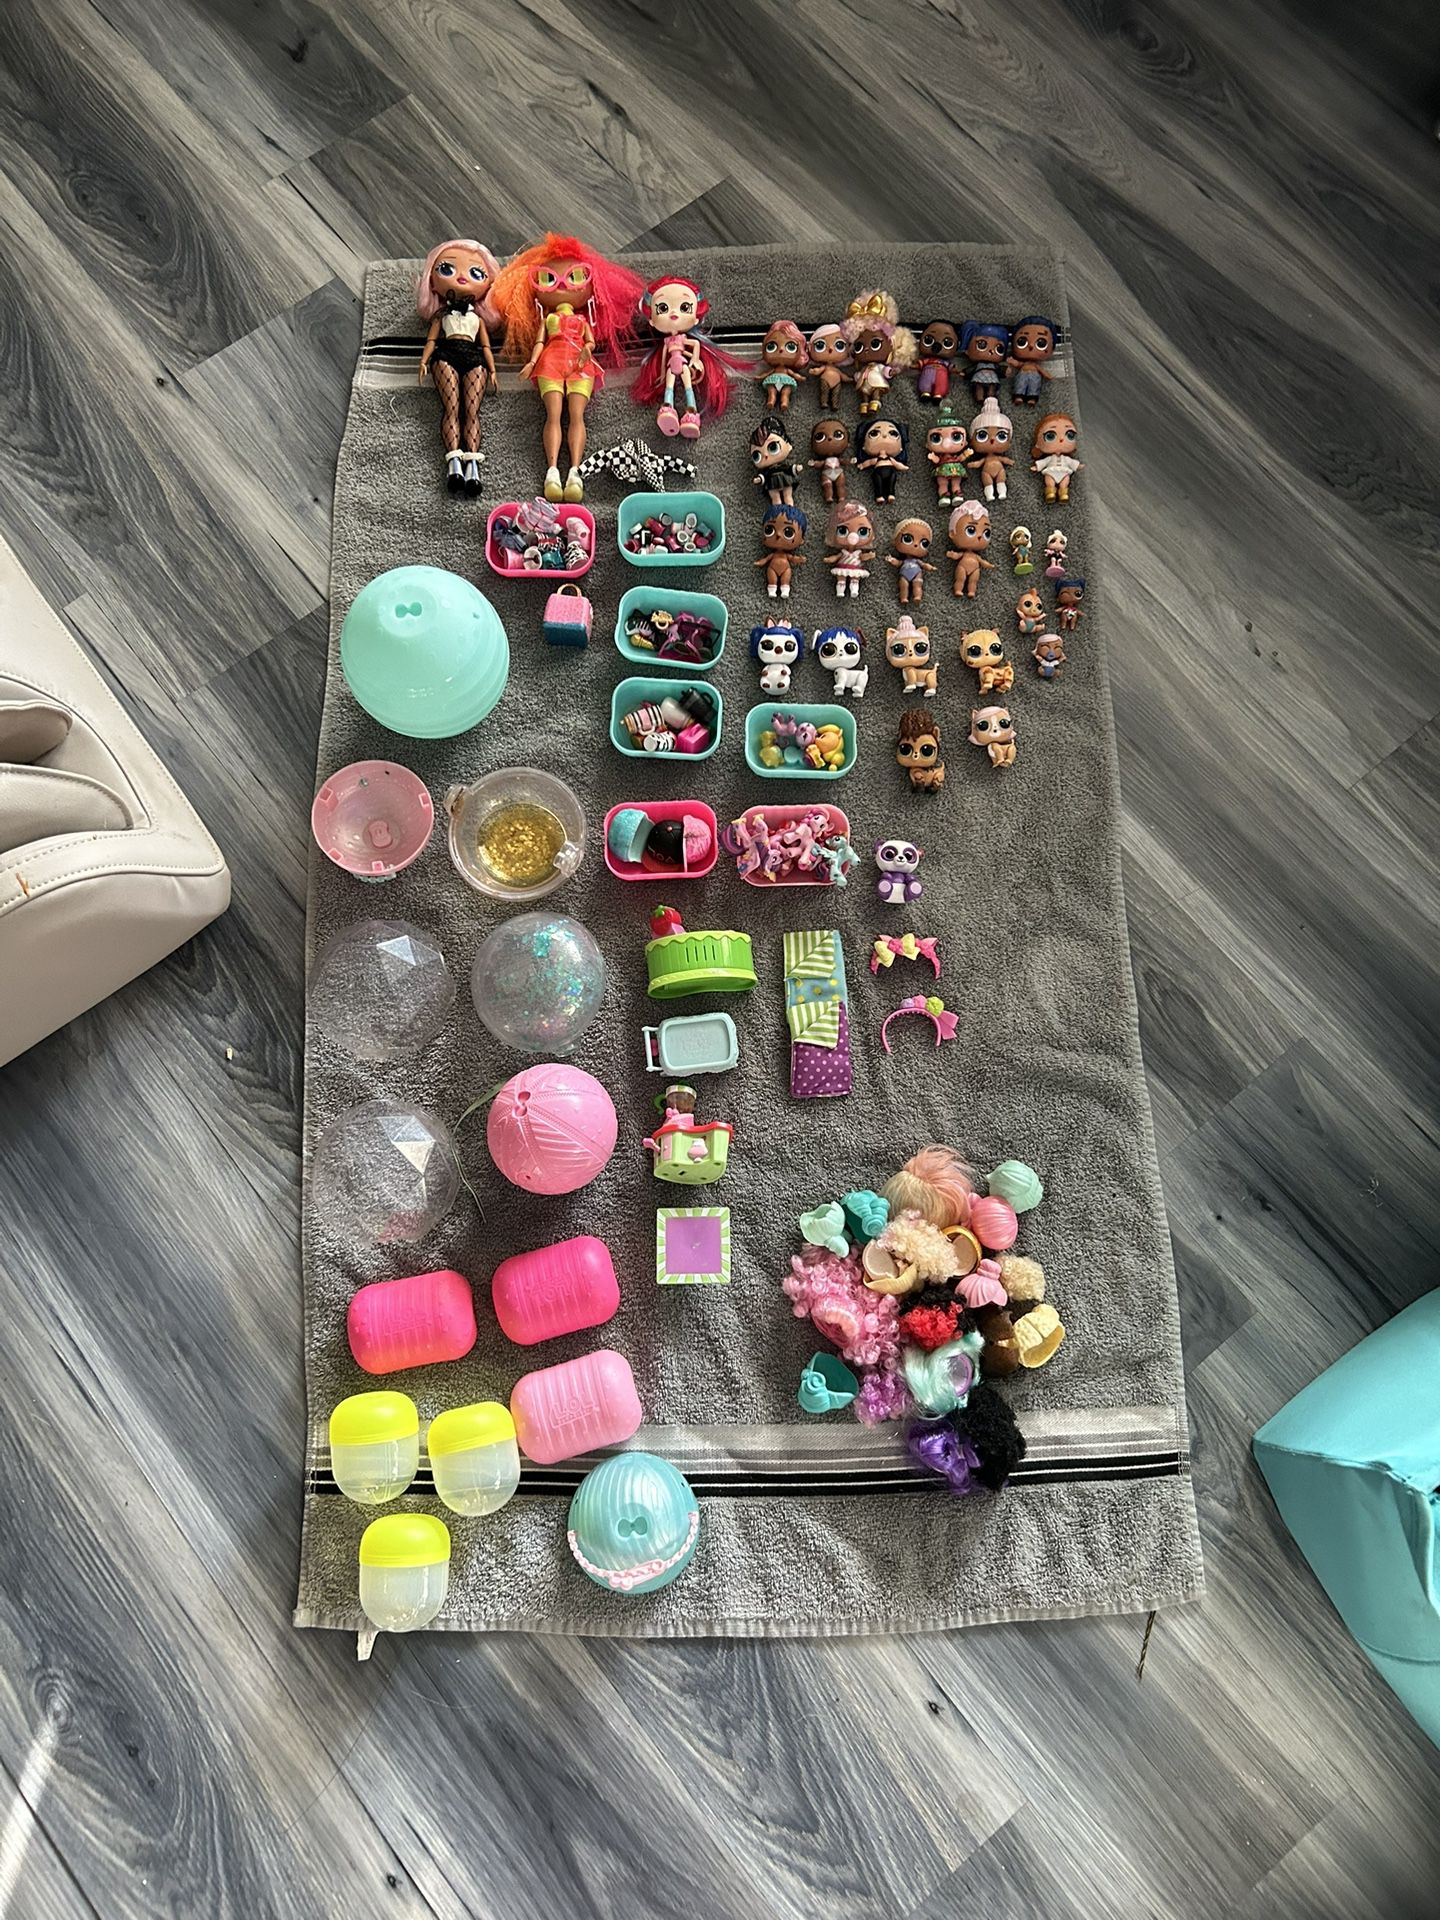 Lol doll LOT and OMG DOLLS and some other mini figures with organizing balls